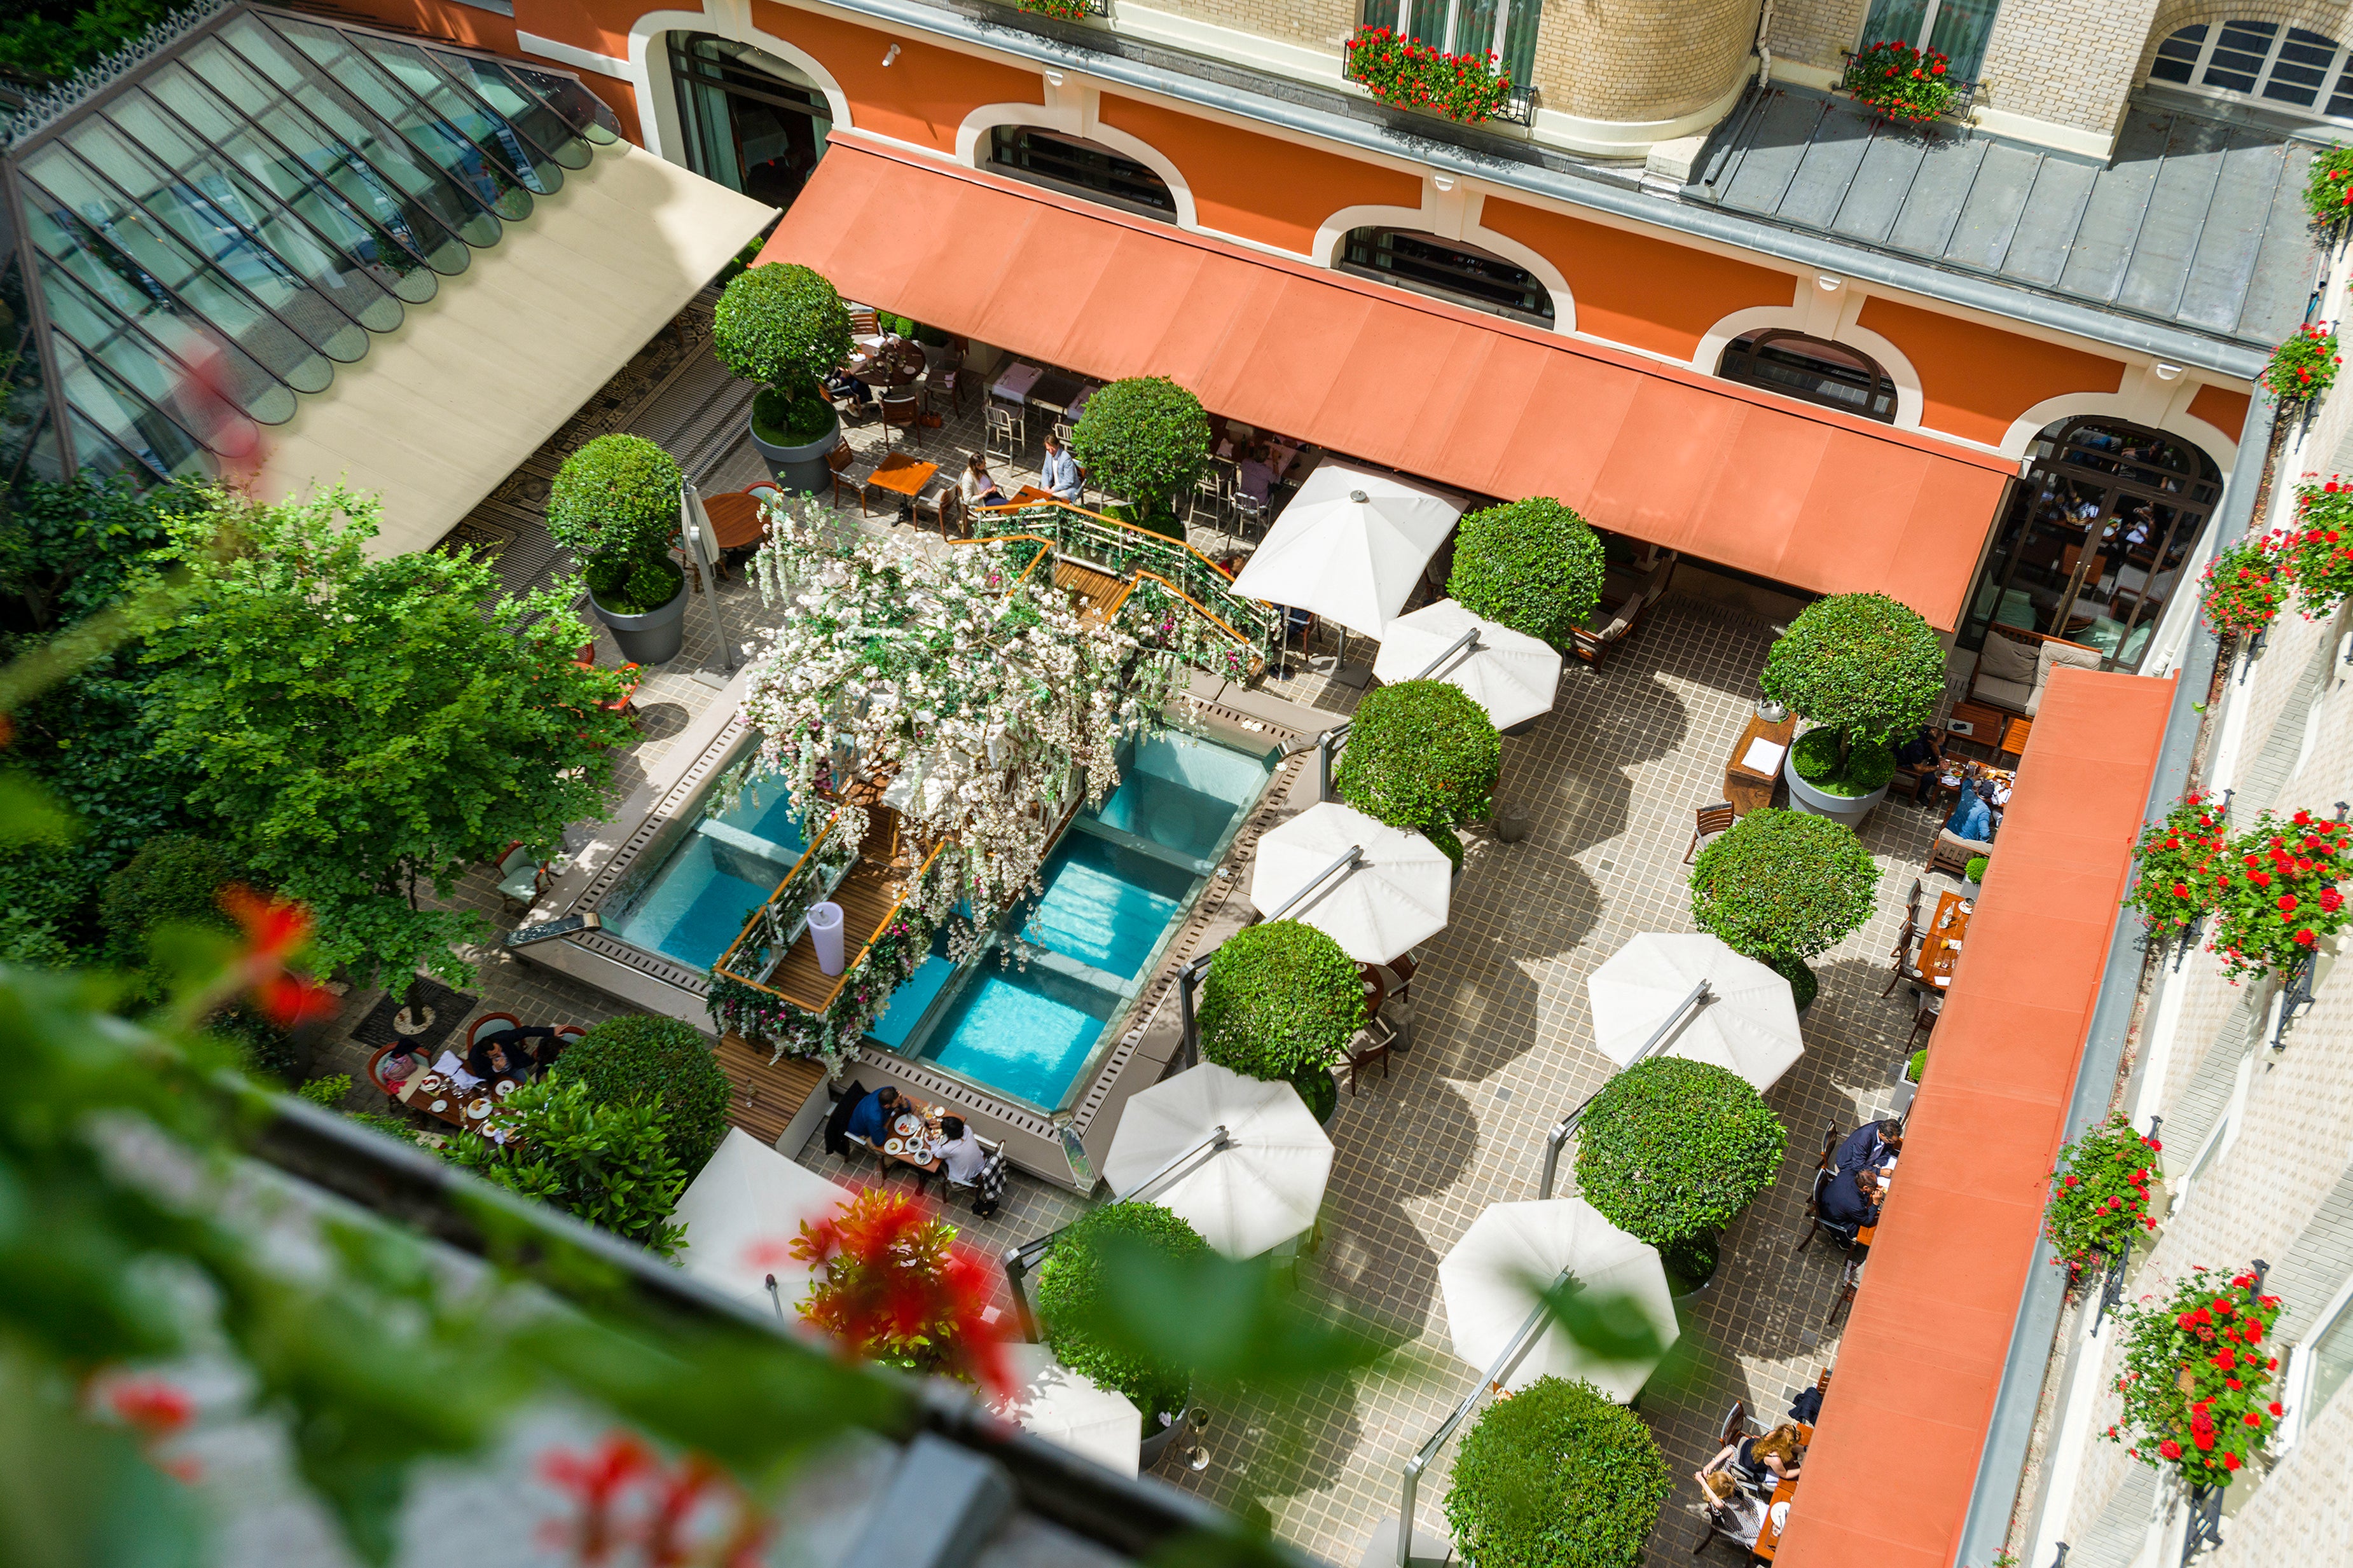 The courtyard at Le Royal Monceau is one of several romantic settings in the hotel